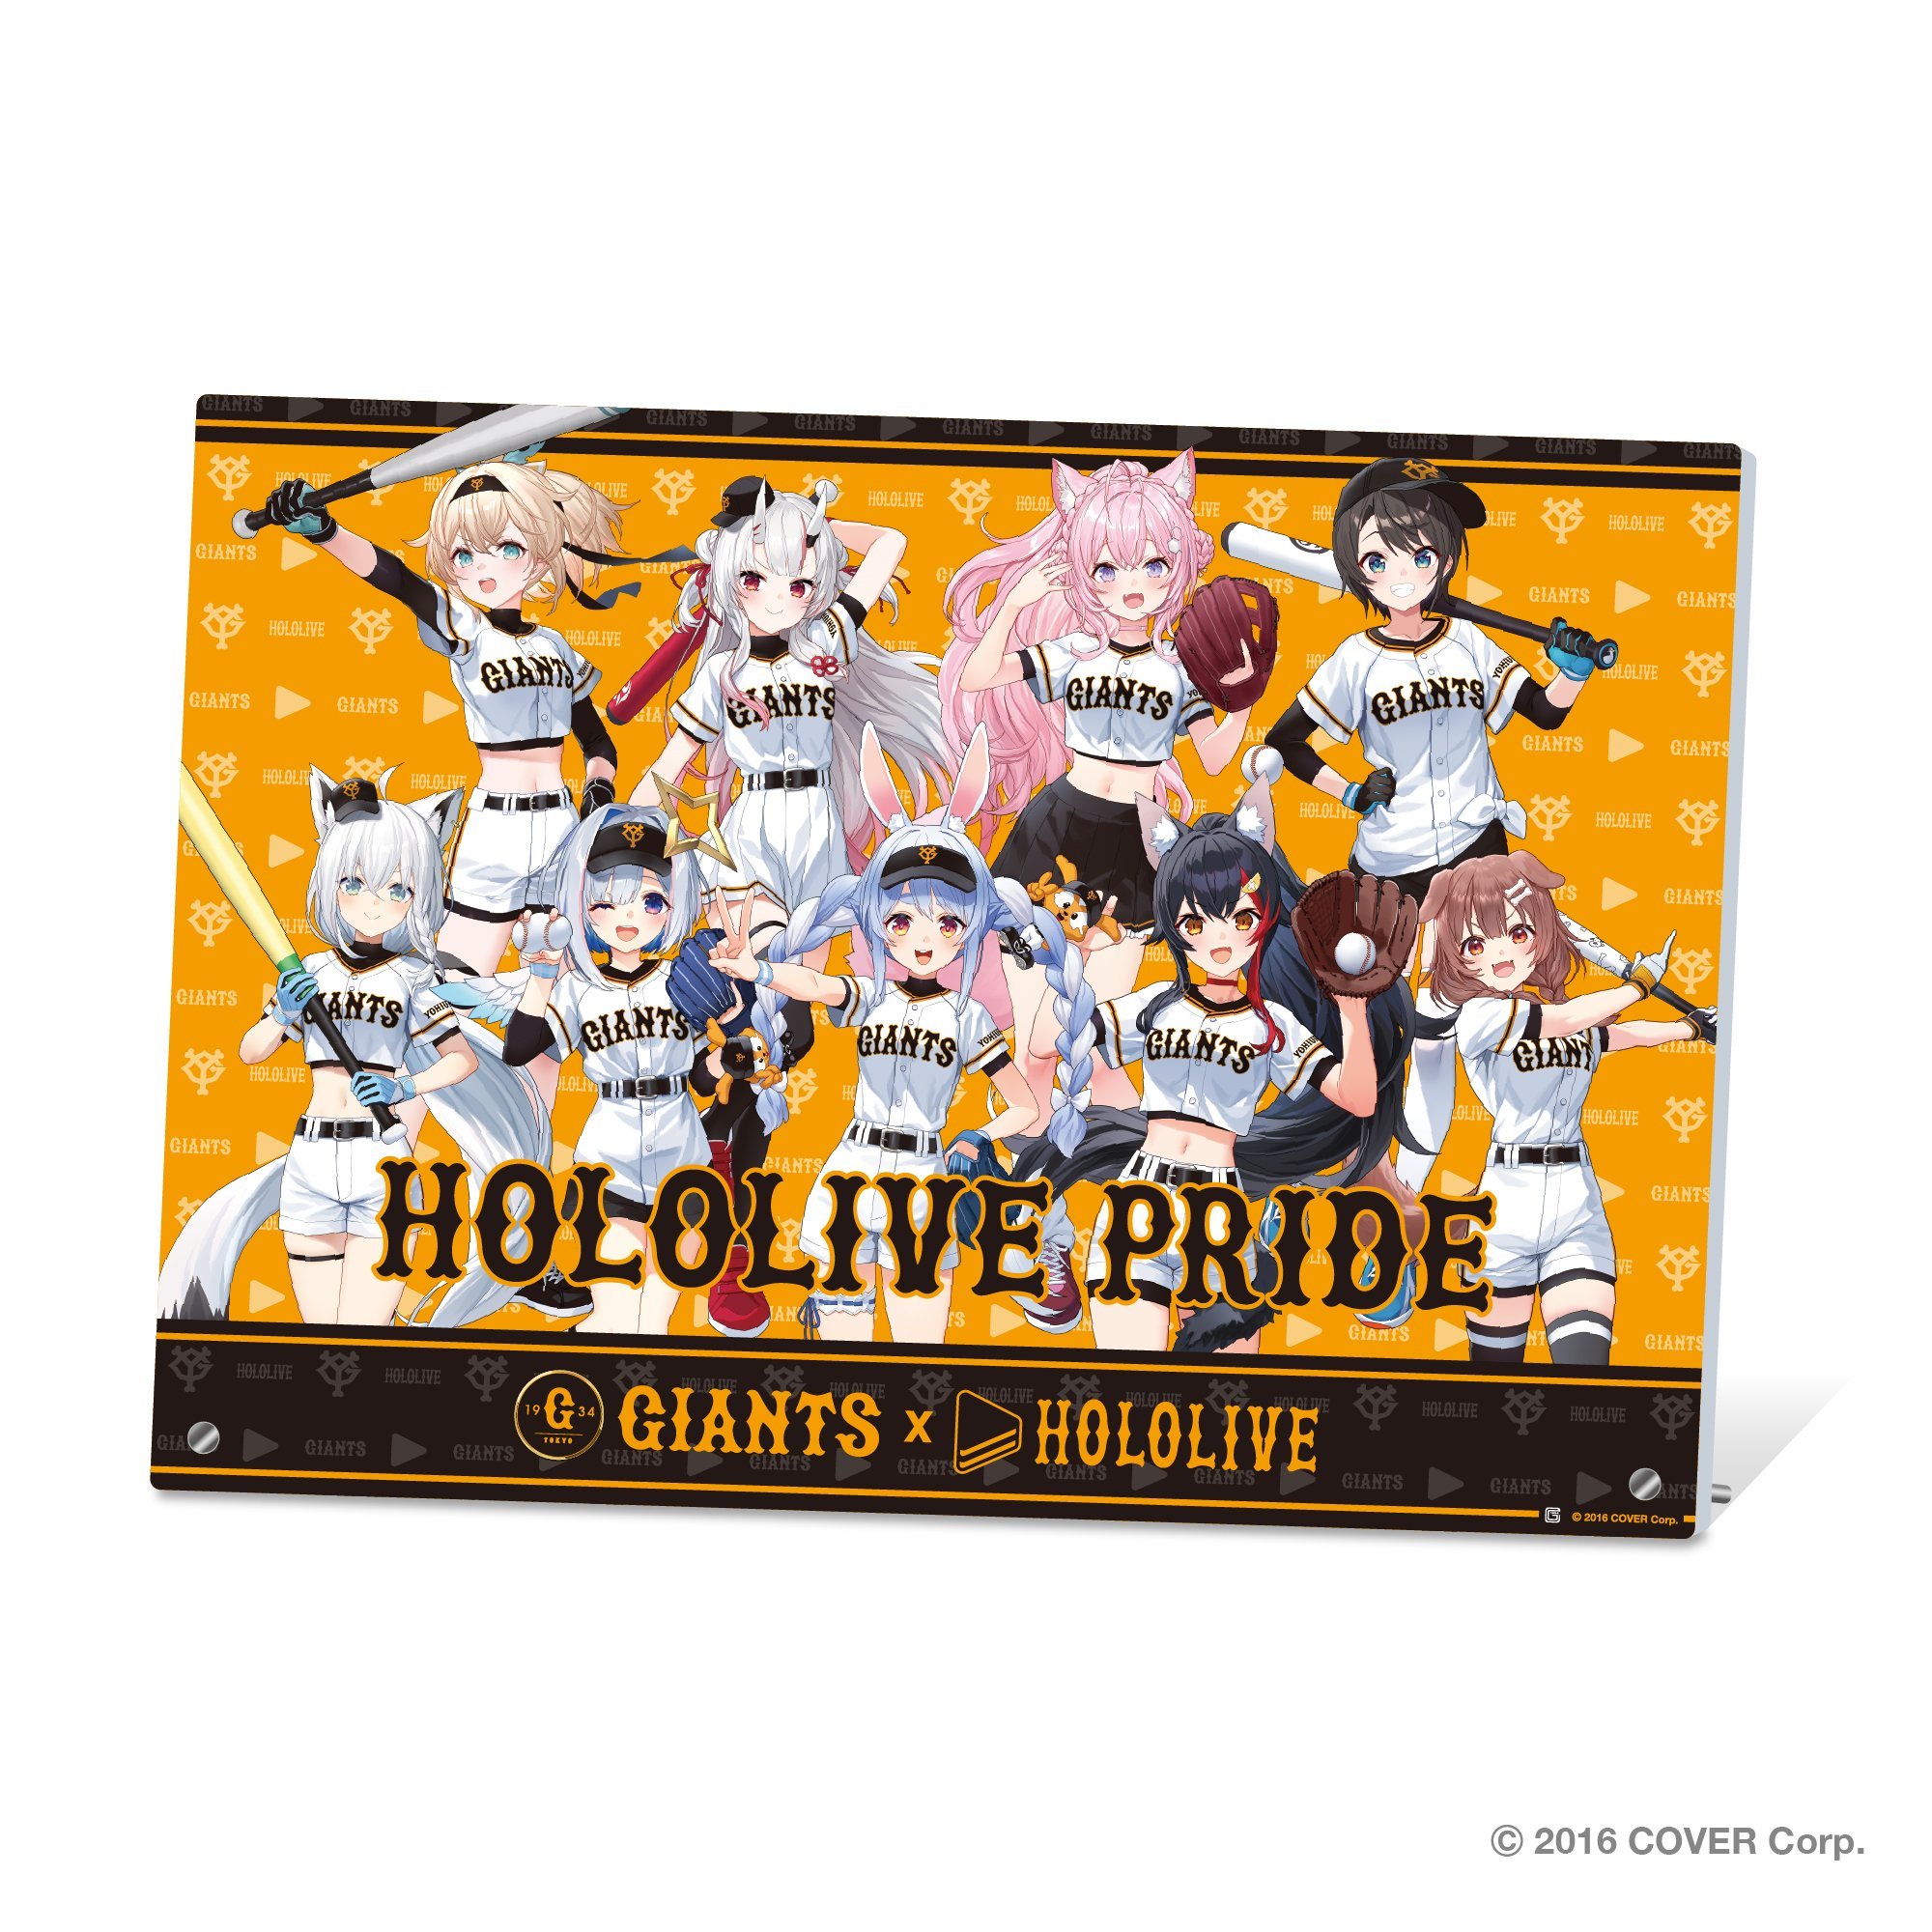 Yomiuri Giants x hololive Collab Announced; features venue decorations, special signage, limited-time goods, and a collaboration baseball game — hololive TODAY